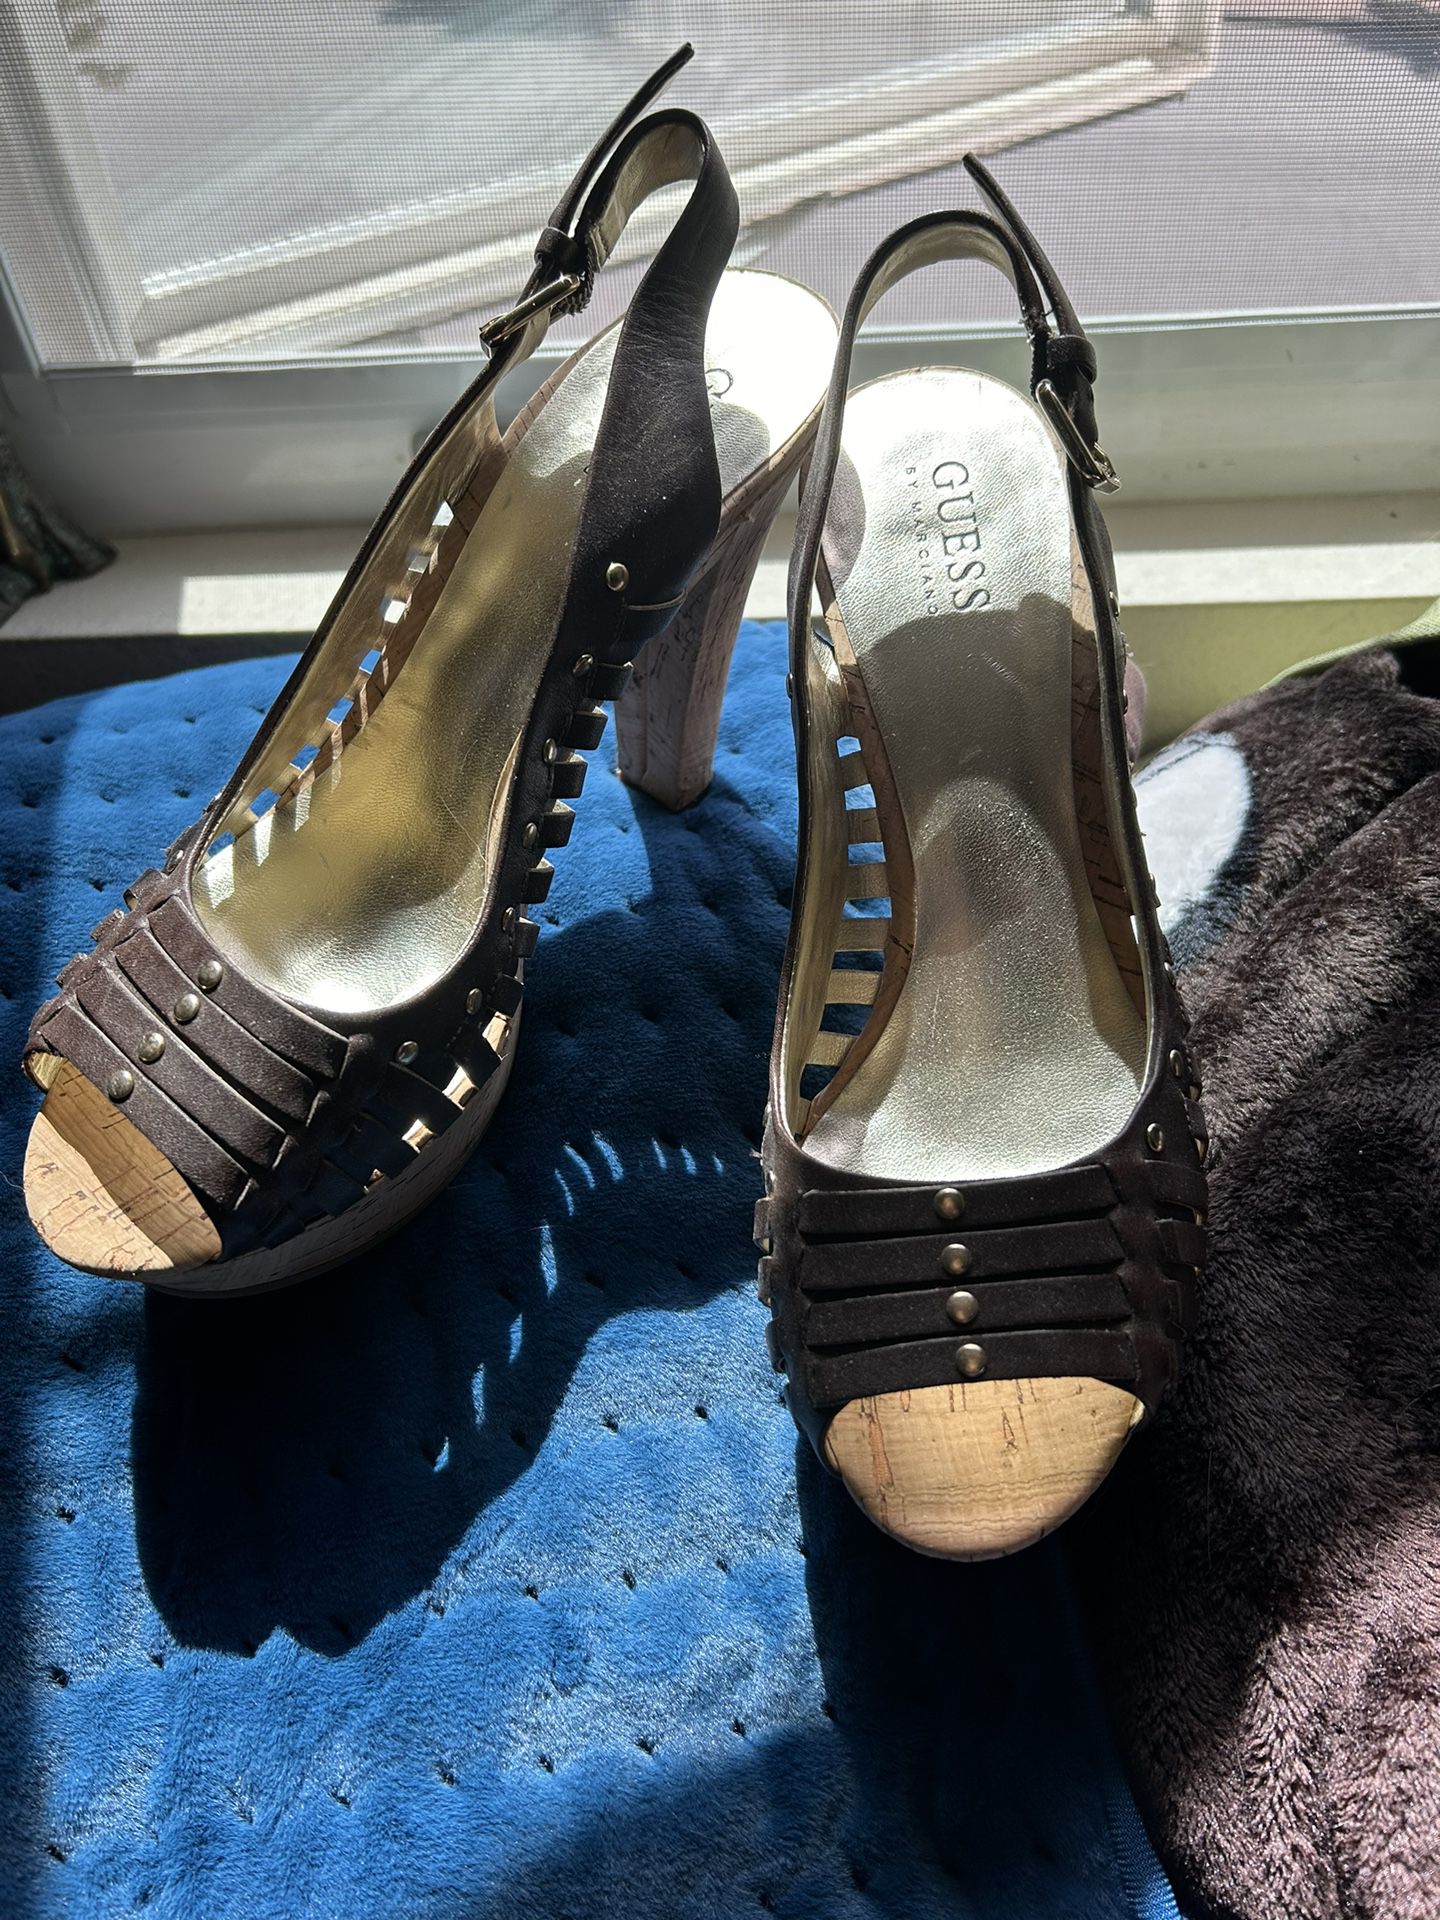 NEW AND NEVER WORN SIZE 8 CUTE PLATFORM HEELS